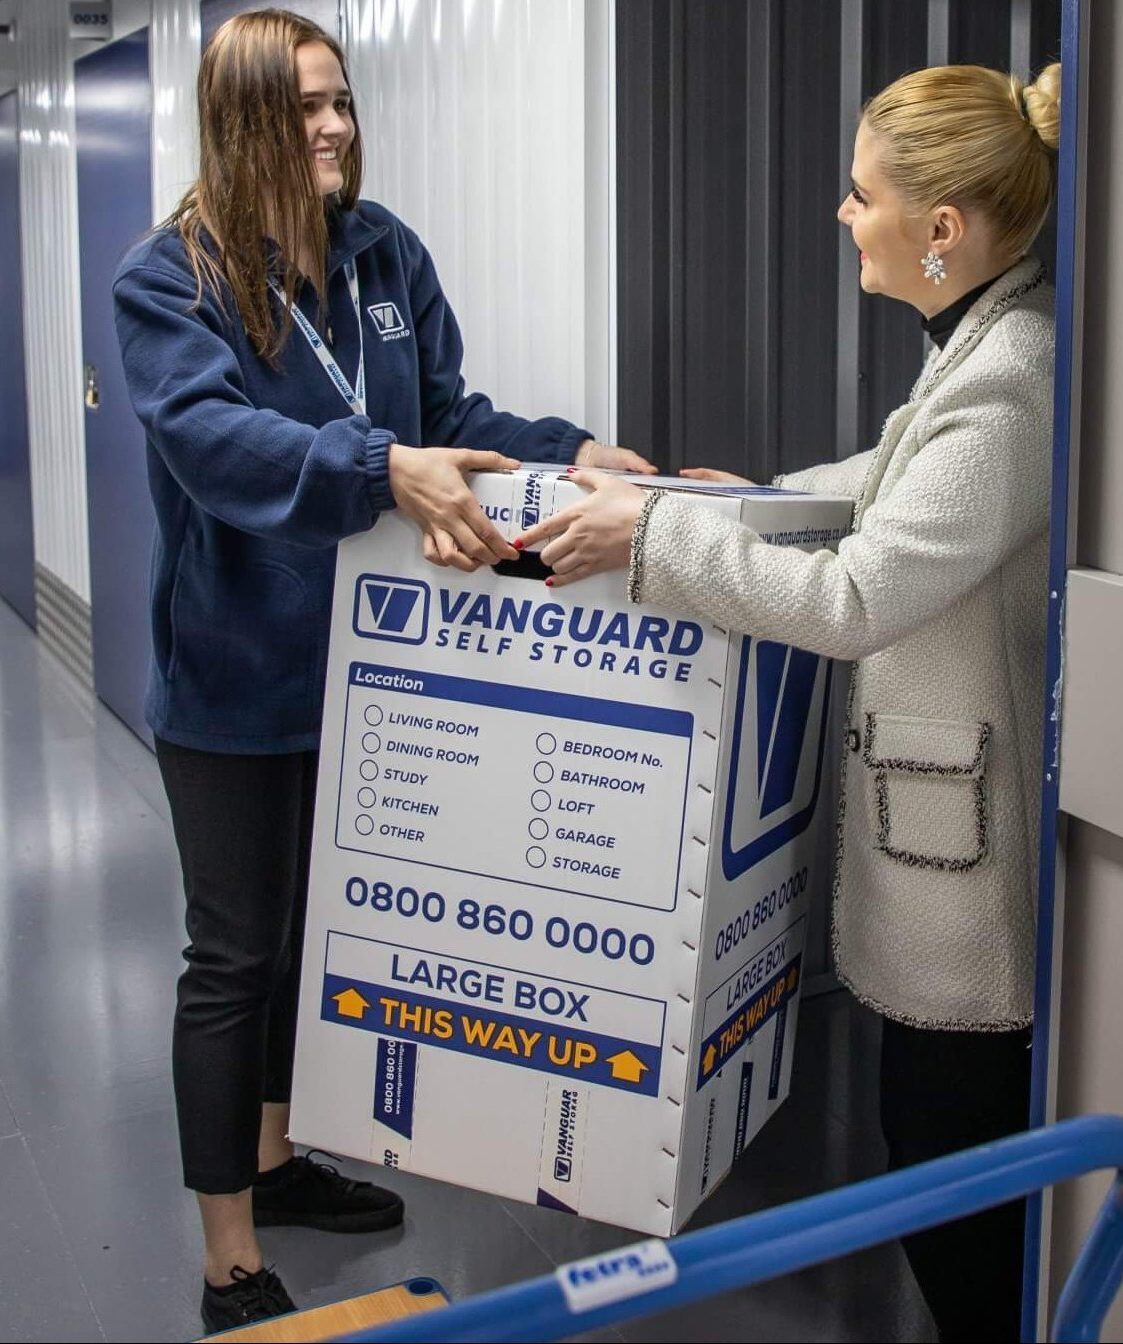 A photo showing a Vanguard employee helping a customer move some Vanguard cardboard boxes into one of the self-storage units.